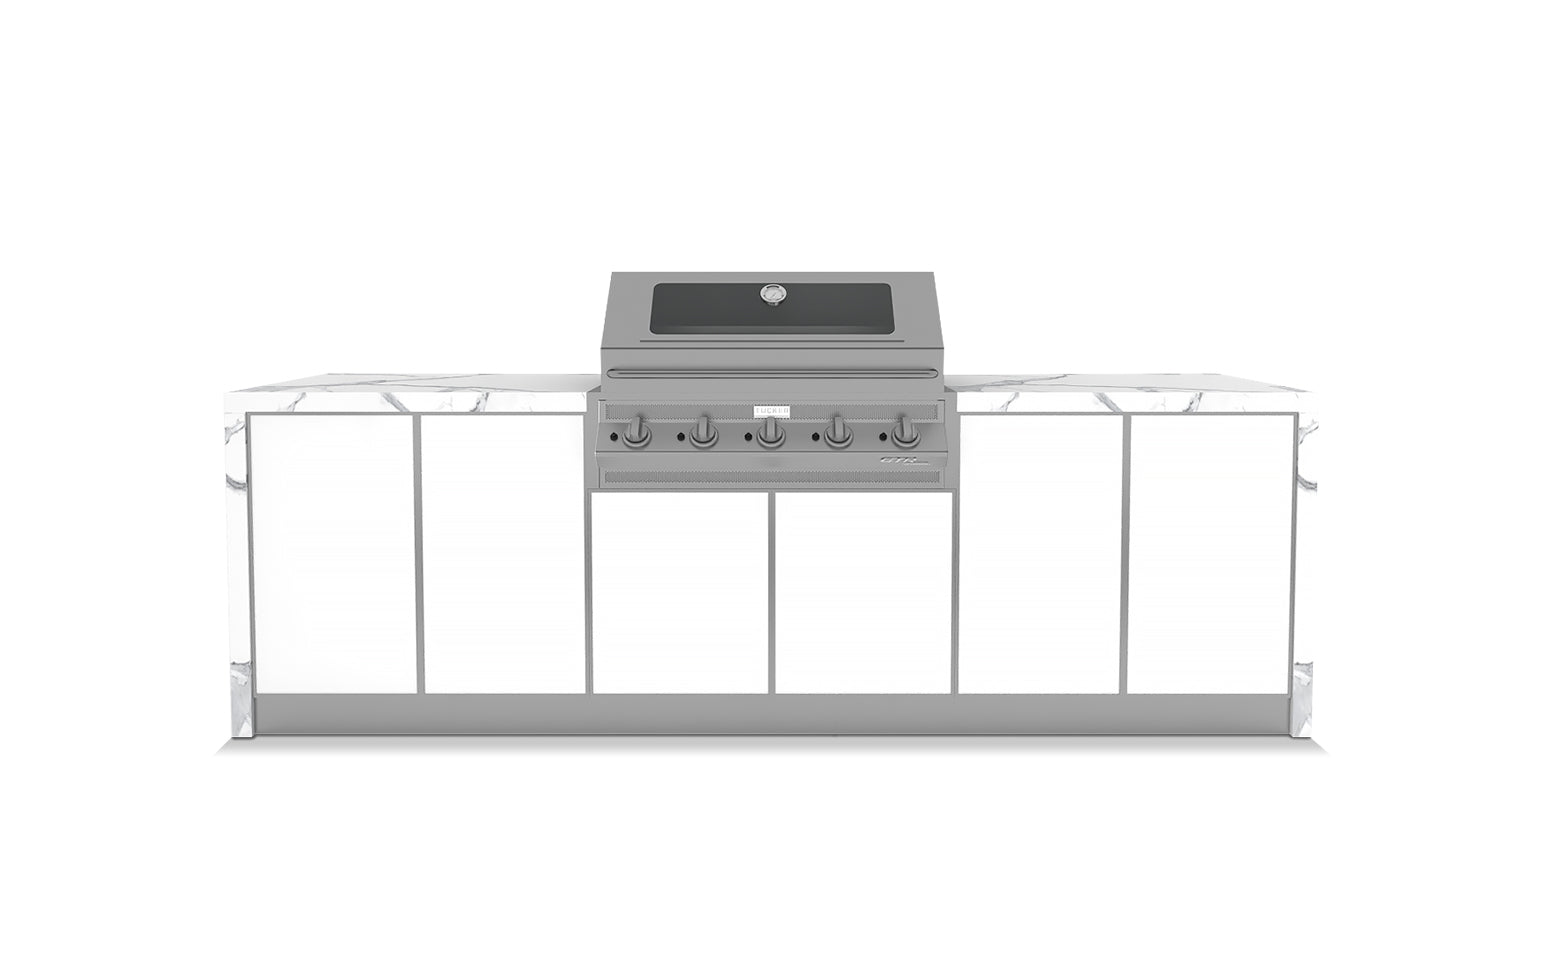 The GTR Classic White Outdoor Kitchen Package